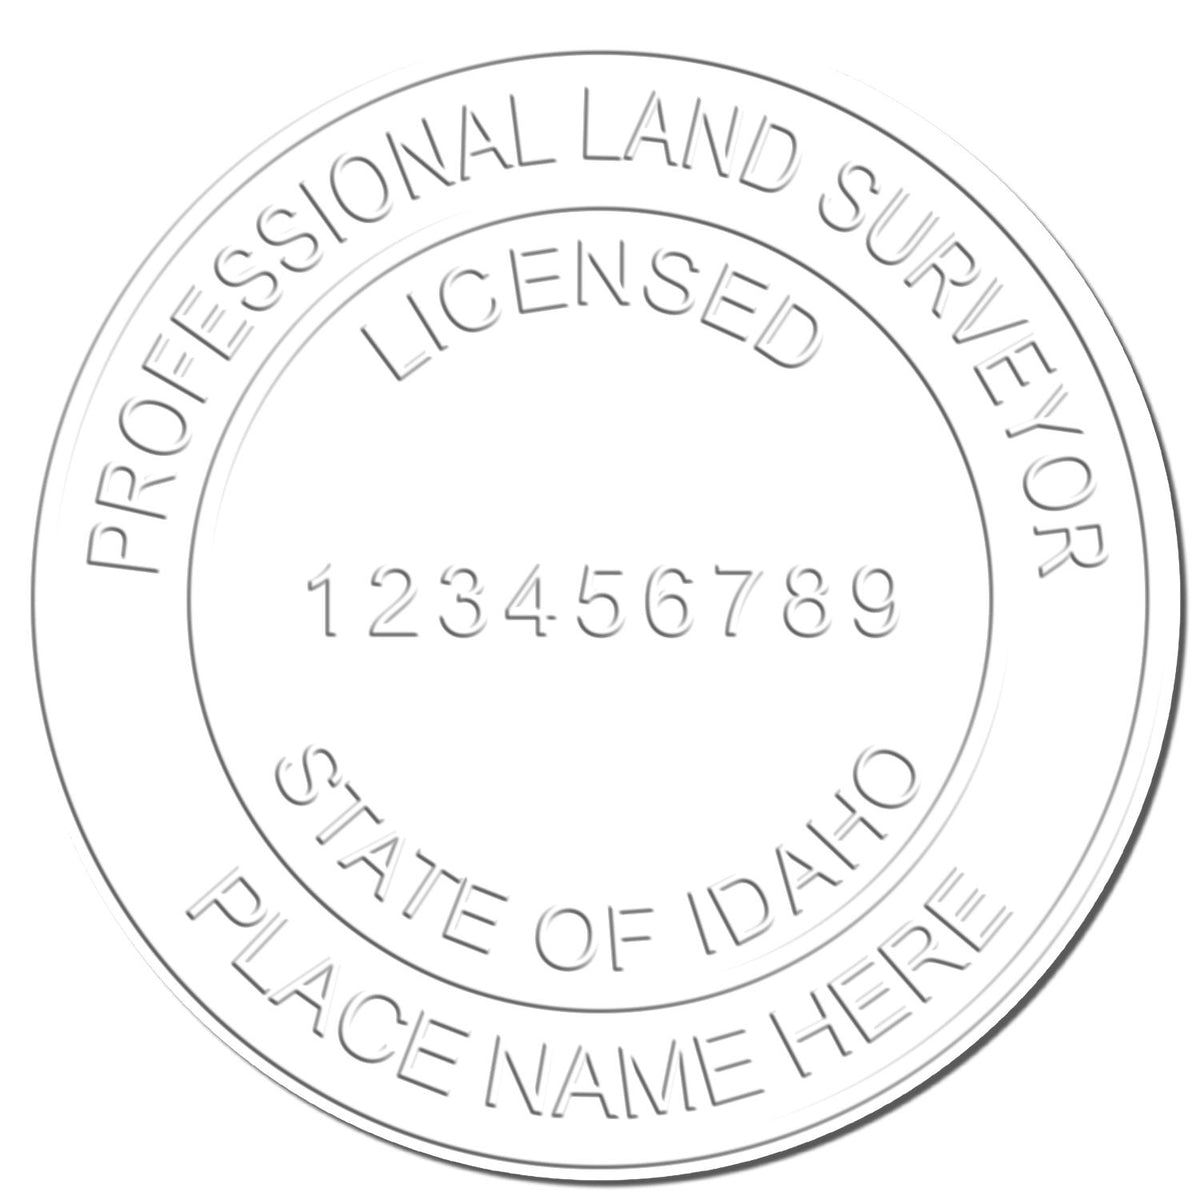 This paper is stamped with a sample imprint of the Hybrid Idaho Land Surveyor Seal, signifying its quality and reliability.